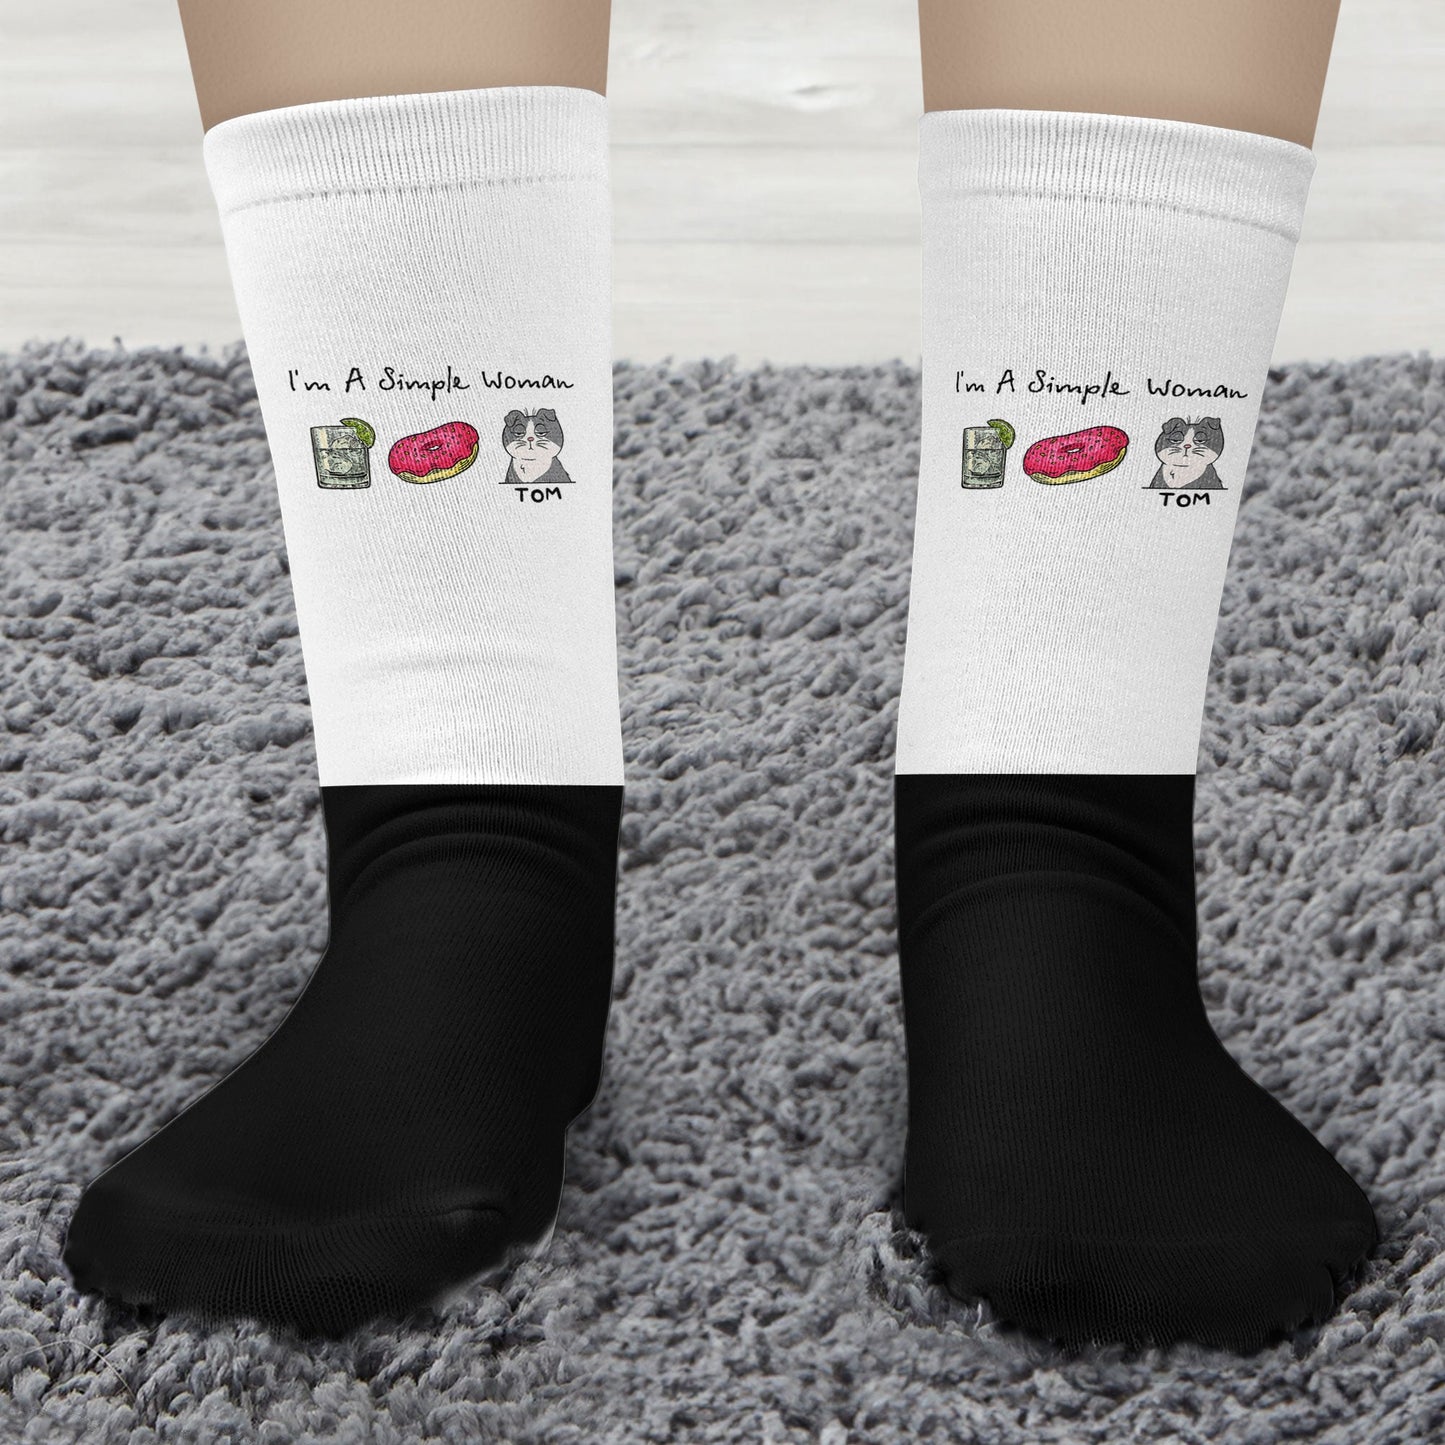 I'm A Simple Woman - Cat Version - Personalized Crew Socks